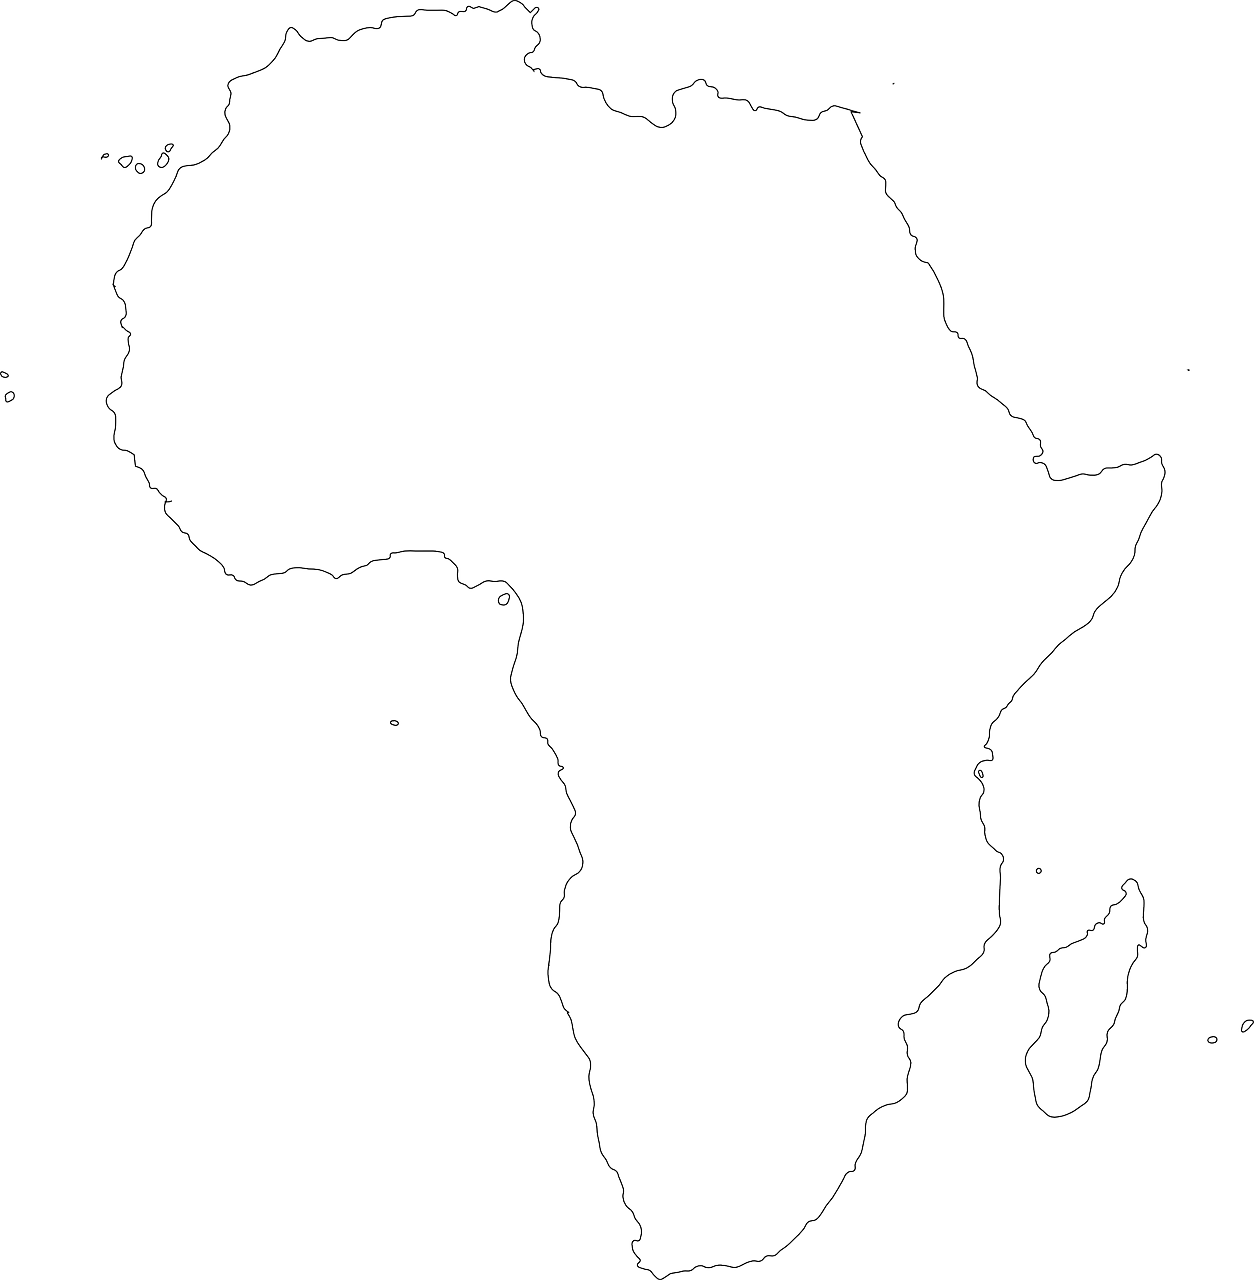 Africa Map PNG HD Image